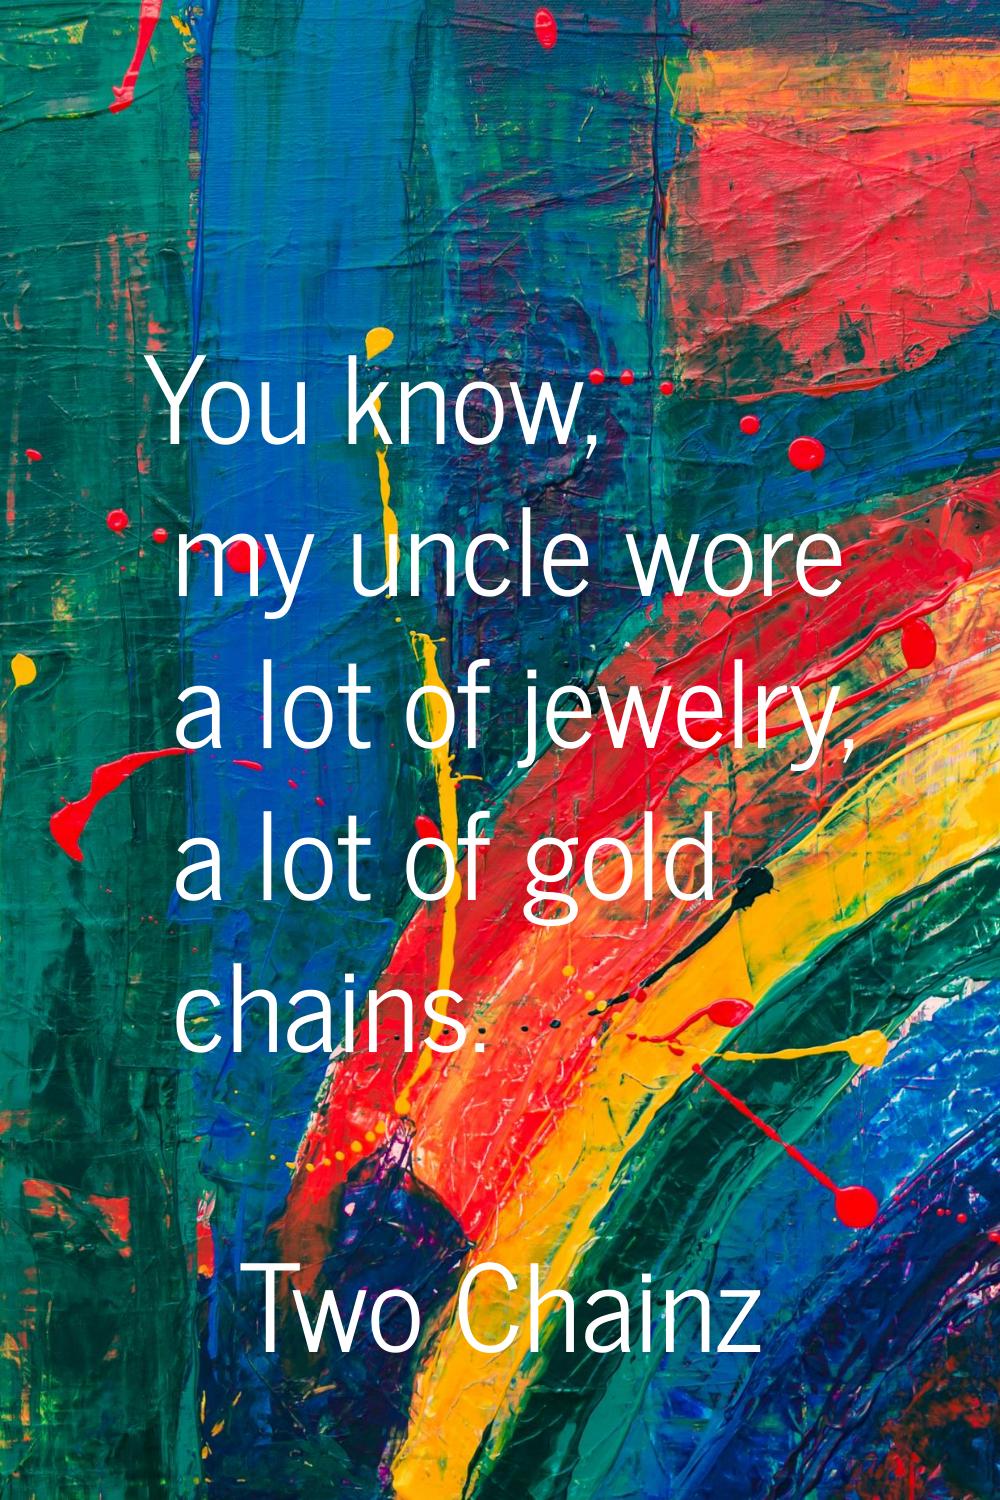 You know, my uncle wore a lot of jewelry, a lot of gold chains.